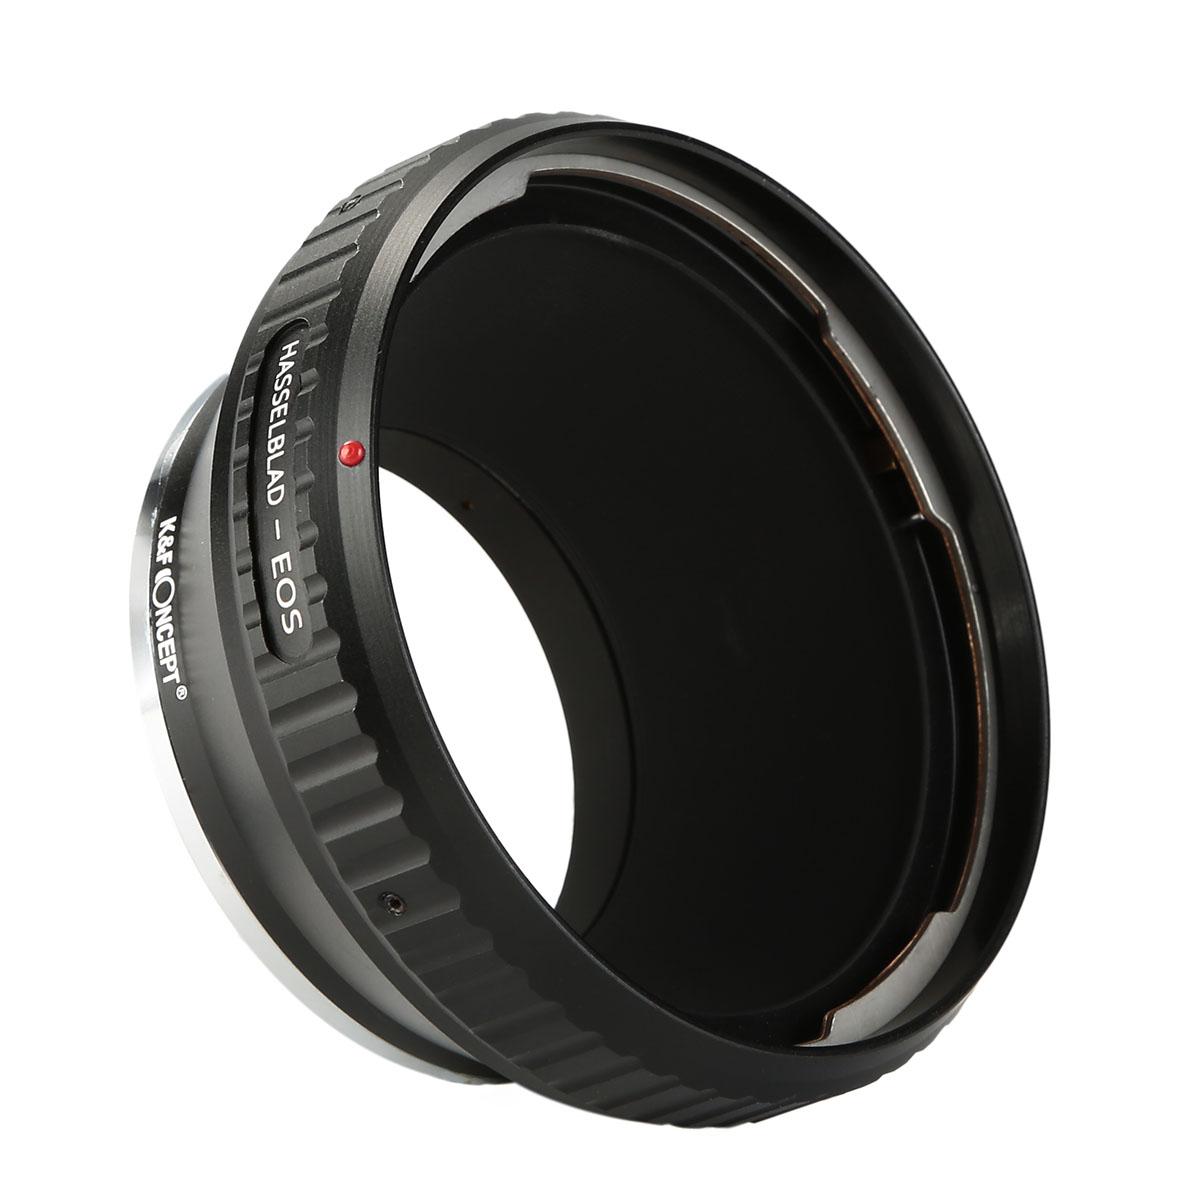  Lens Mount Adapter Compatible with Hasselblad Mount Lens to EF Lens Camera Body HB- EOS